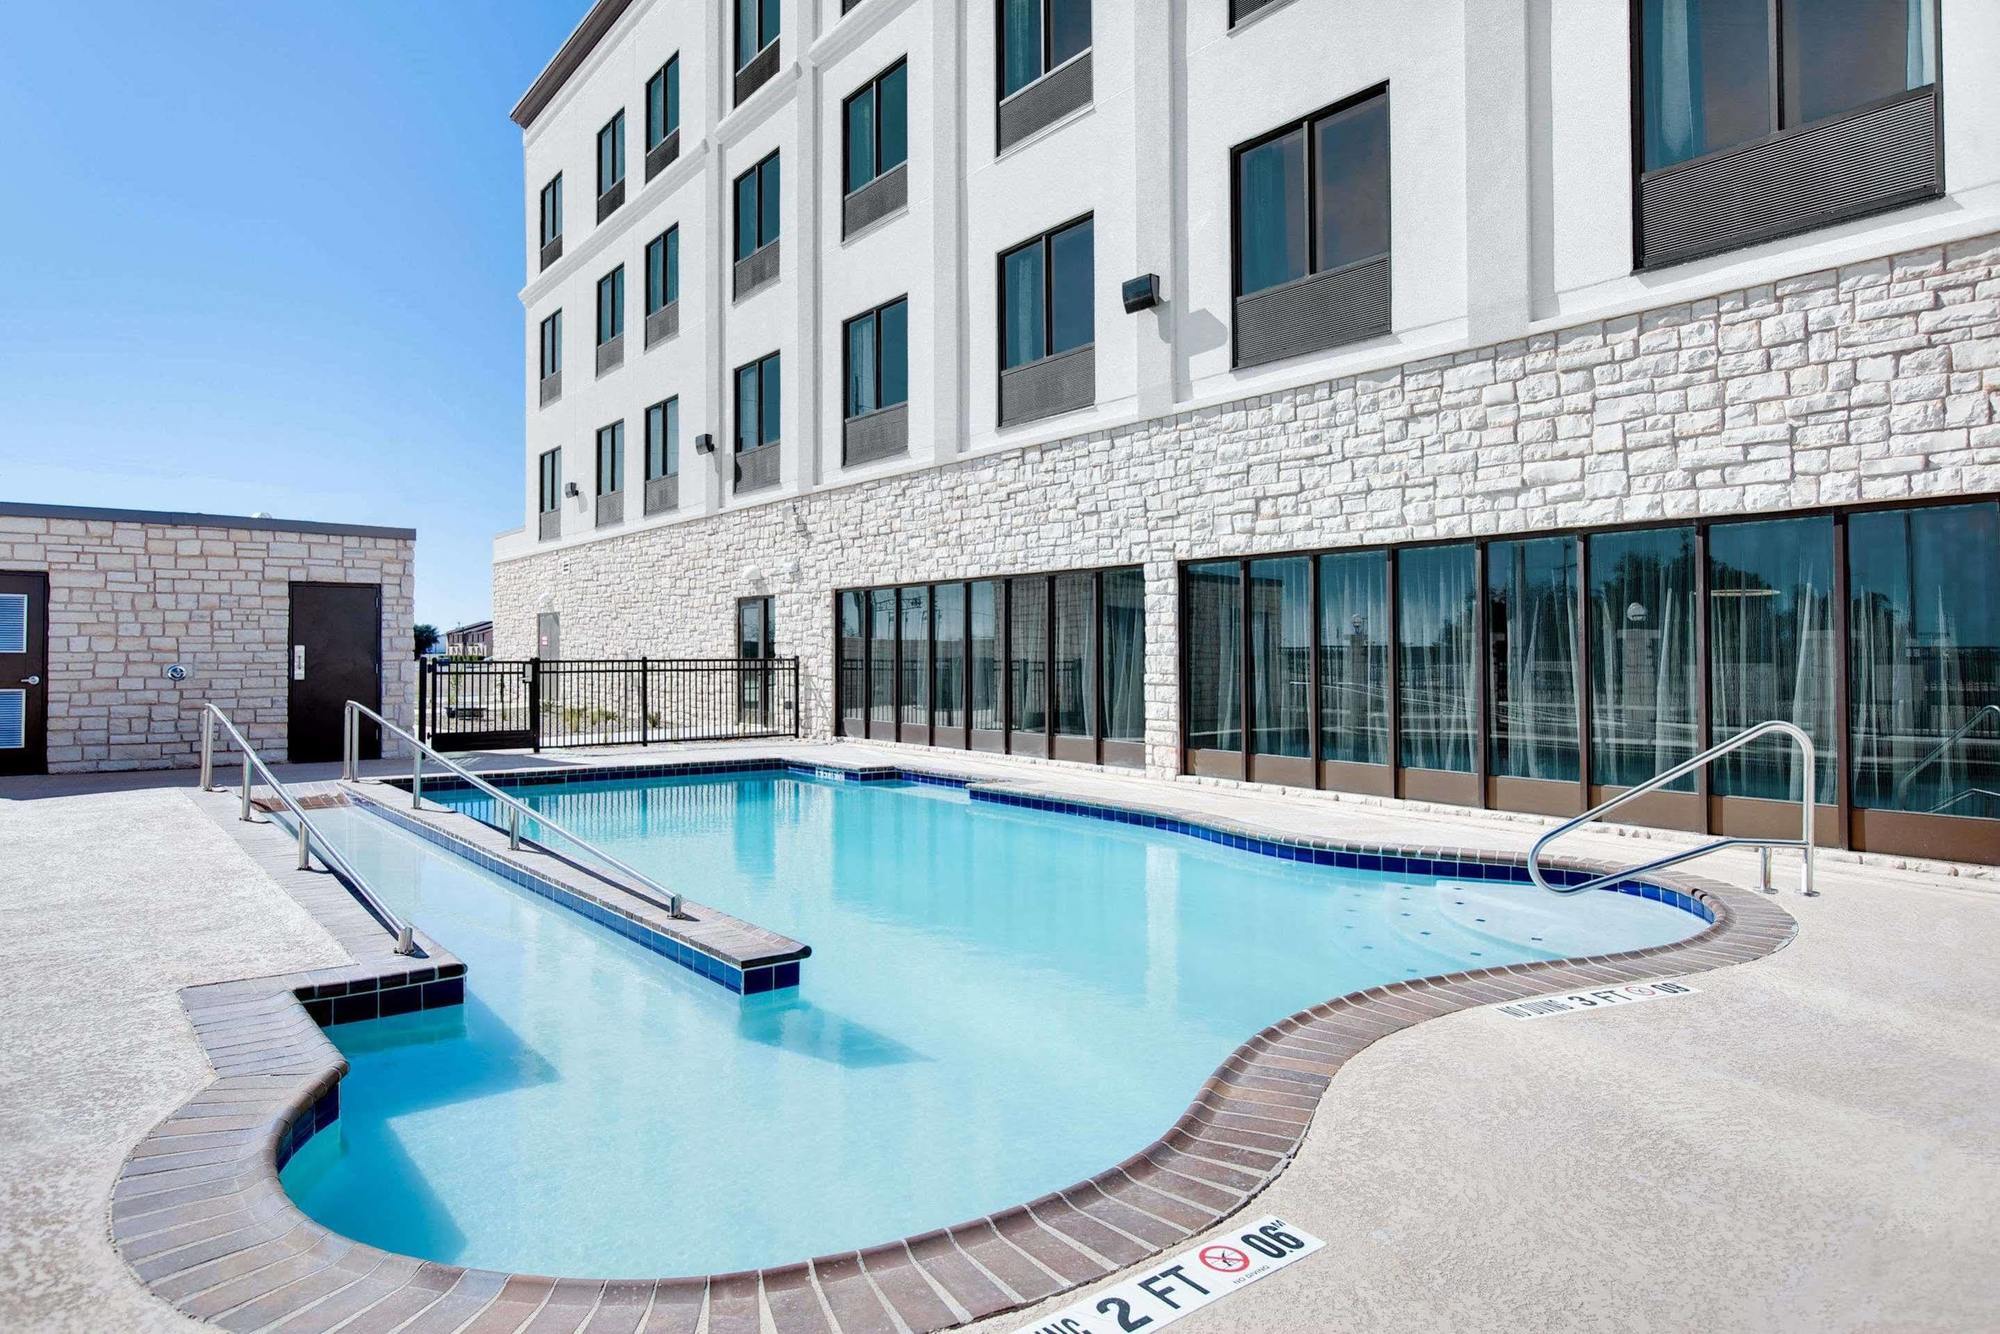 Wingate By Wyndham San Angelo Hotel Exterior photo